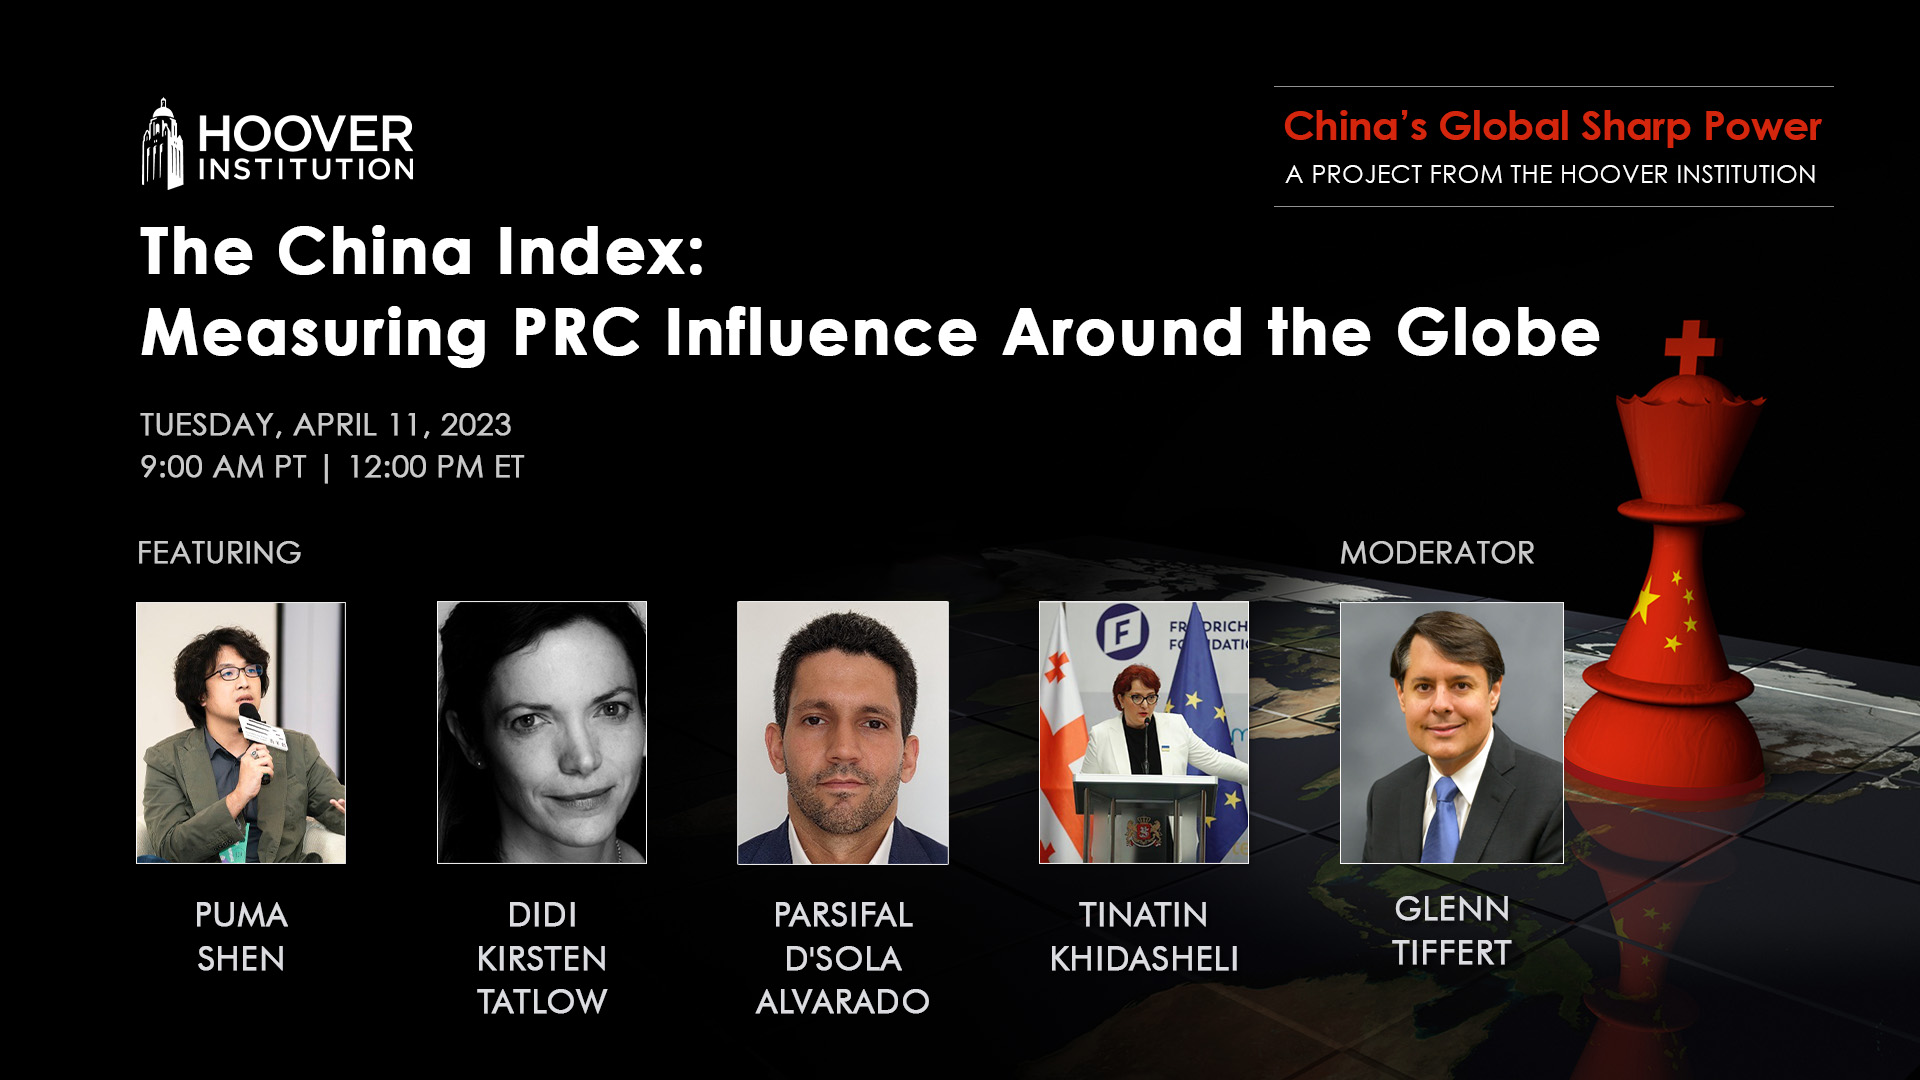 The China Index: Measuring PRC Influence Around the Globe